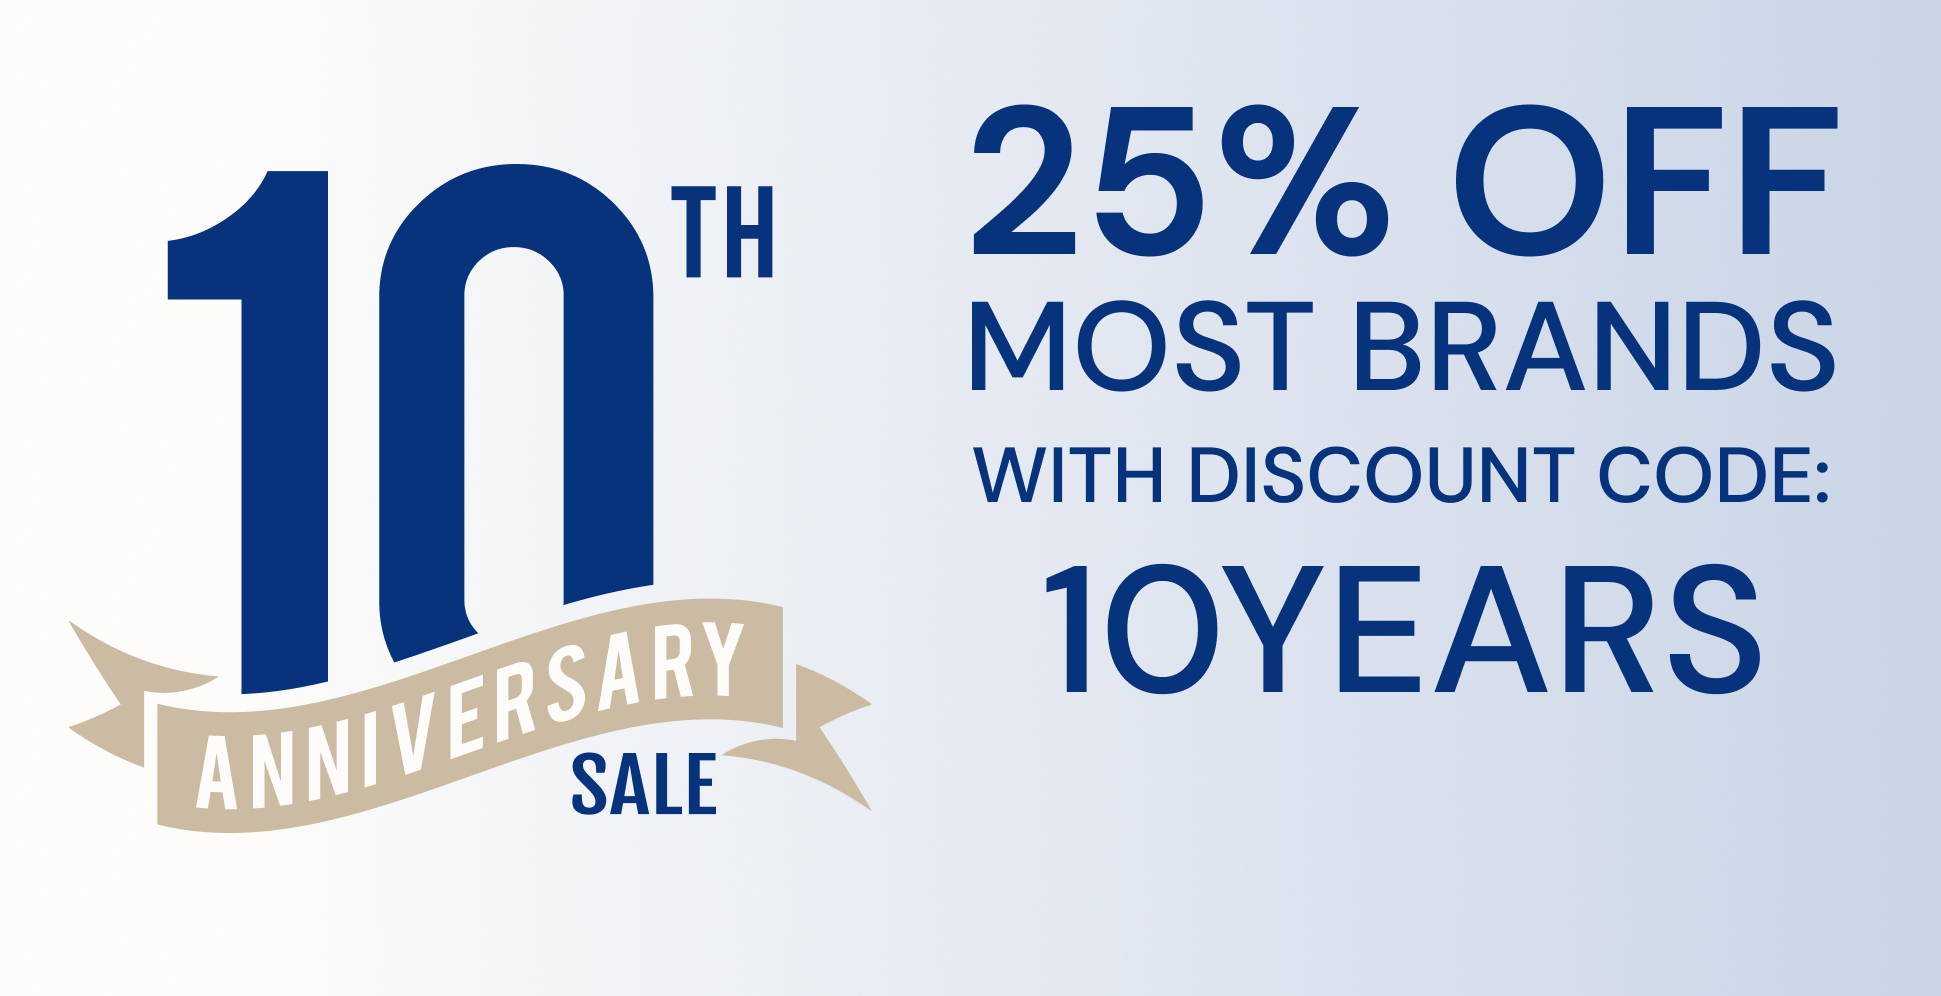 10th Anniversary Sale logo against a pale blue background with the text 25% off most brands with discount code 10YEARS